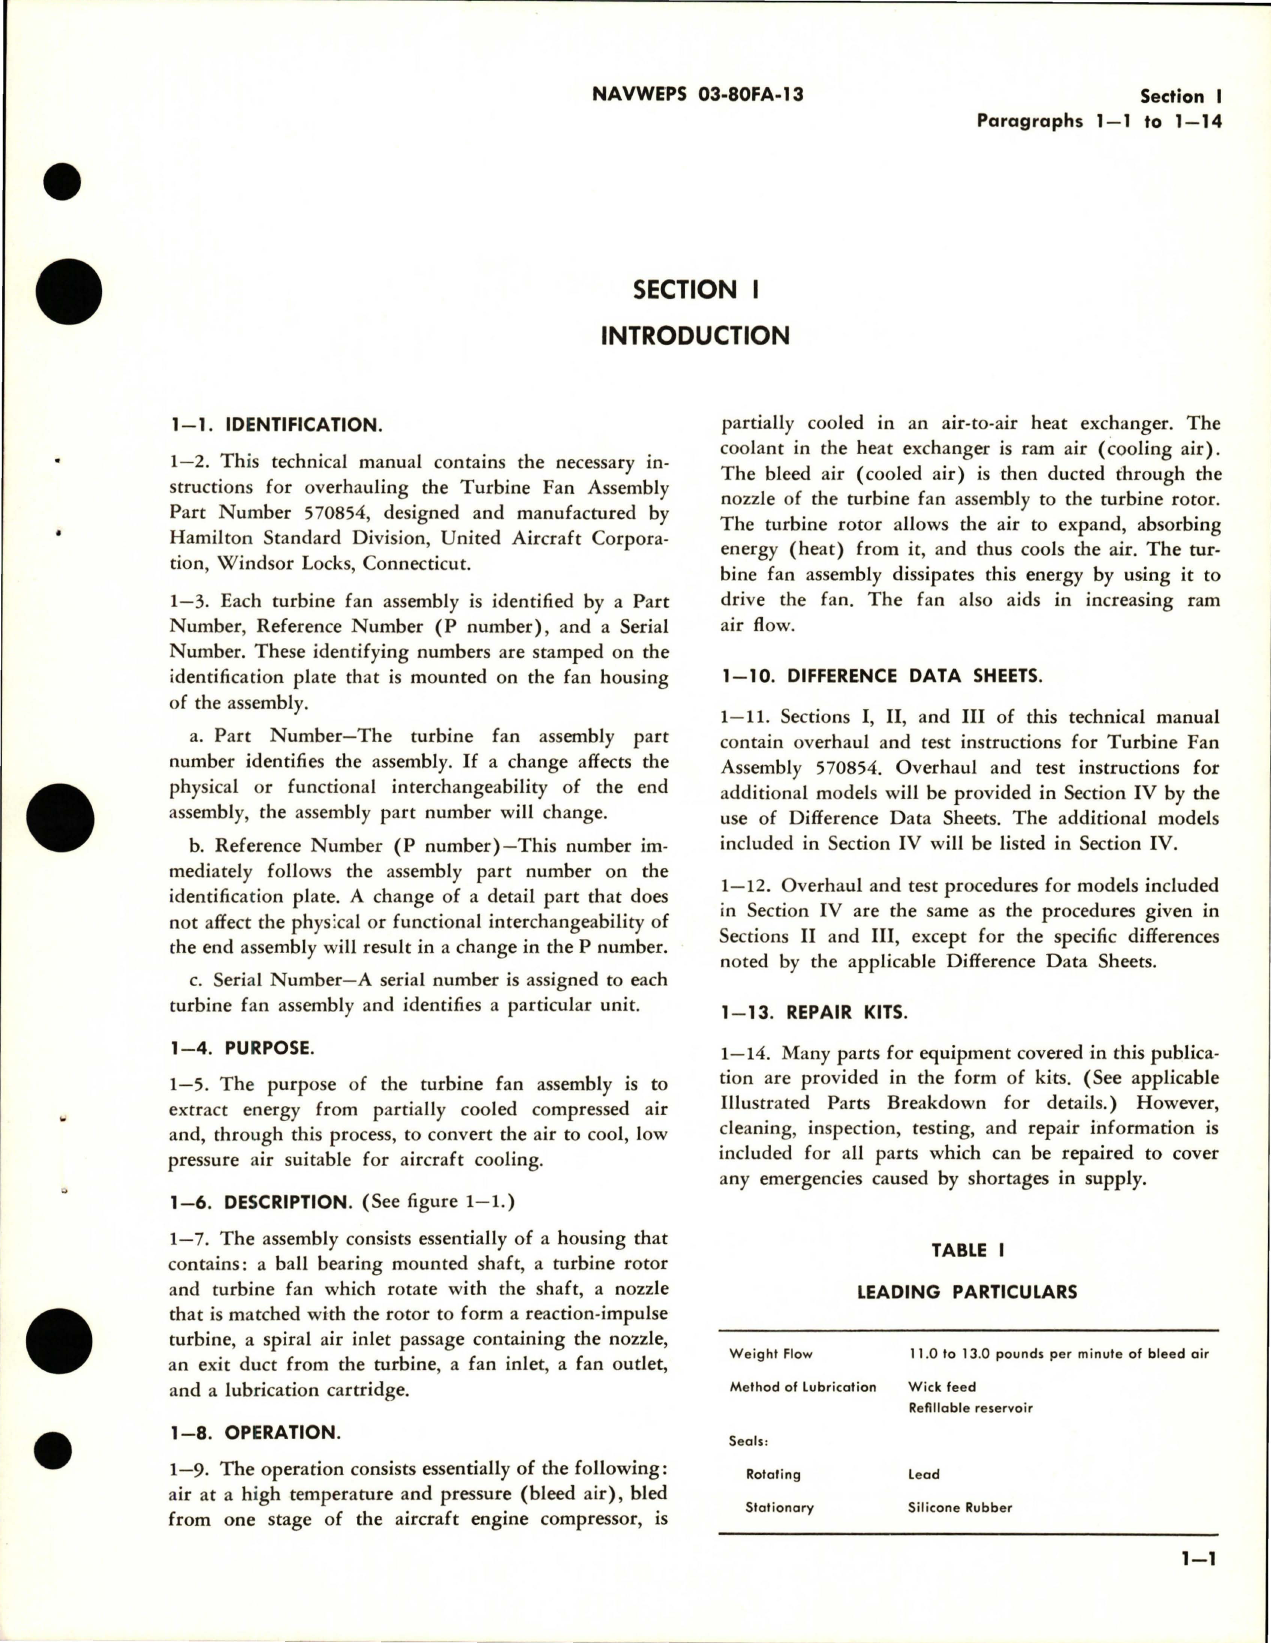 Sample page 5 from AirCorps Library document: Overhaul Instructions for Turbine Fan Assembly - Part 570854 